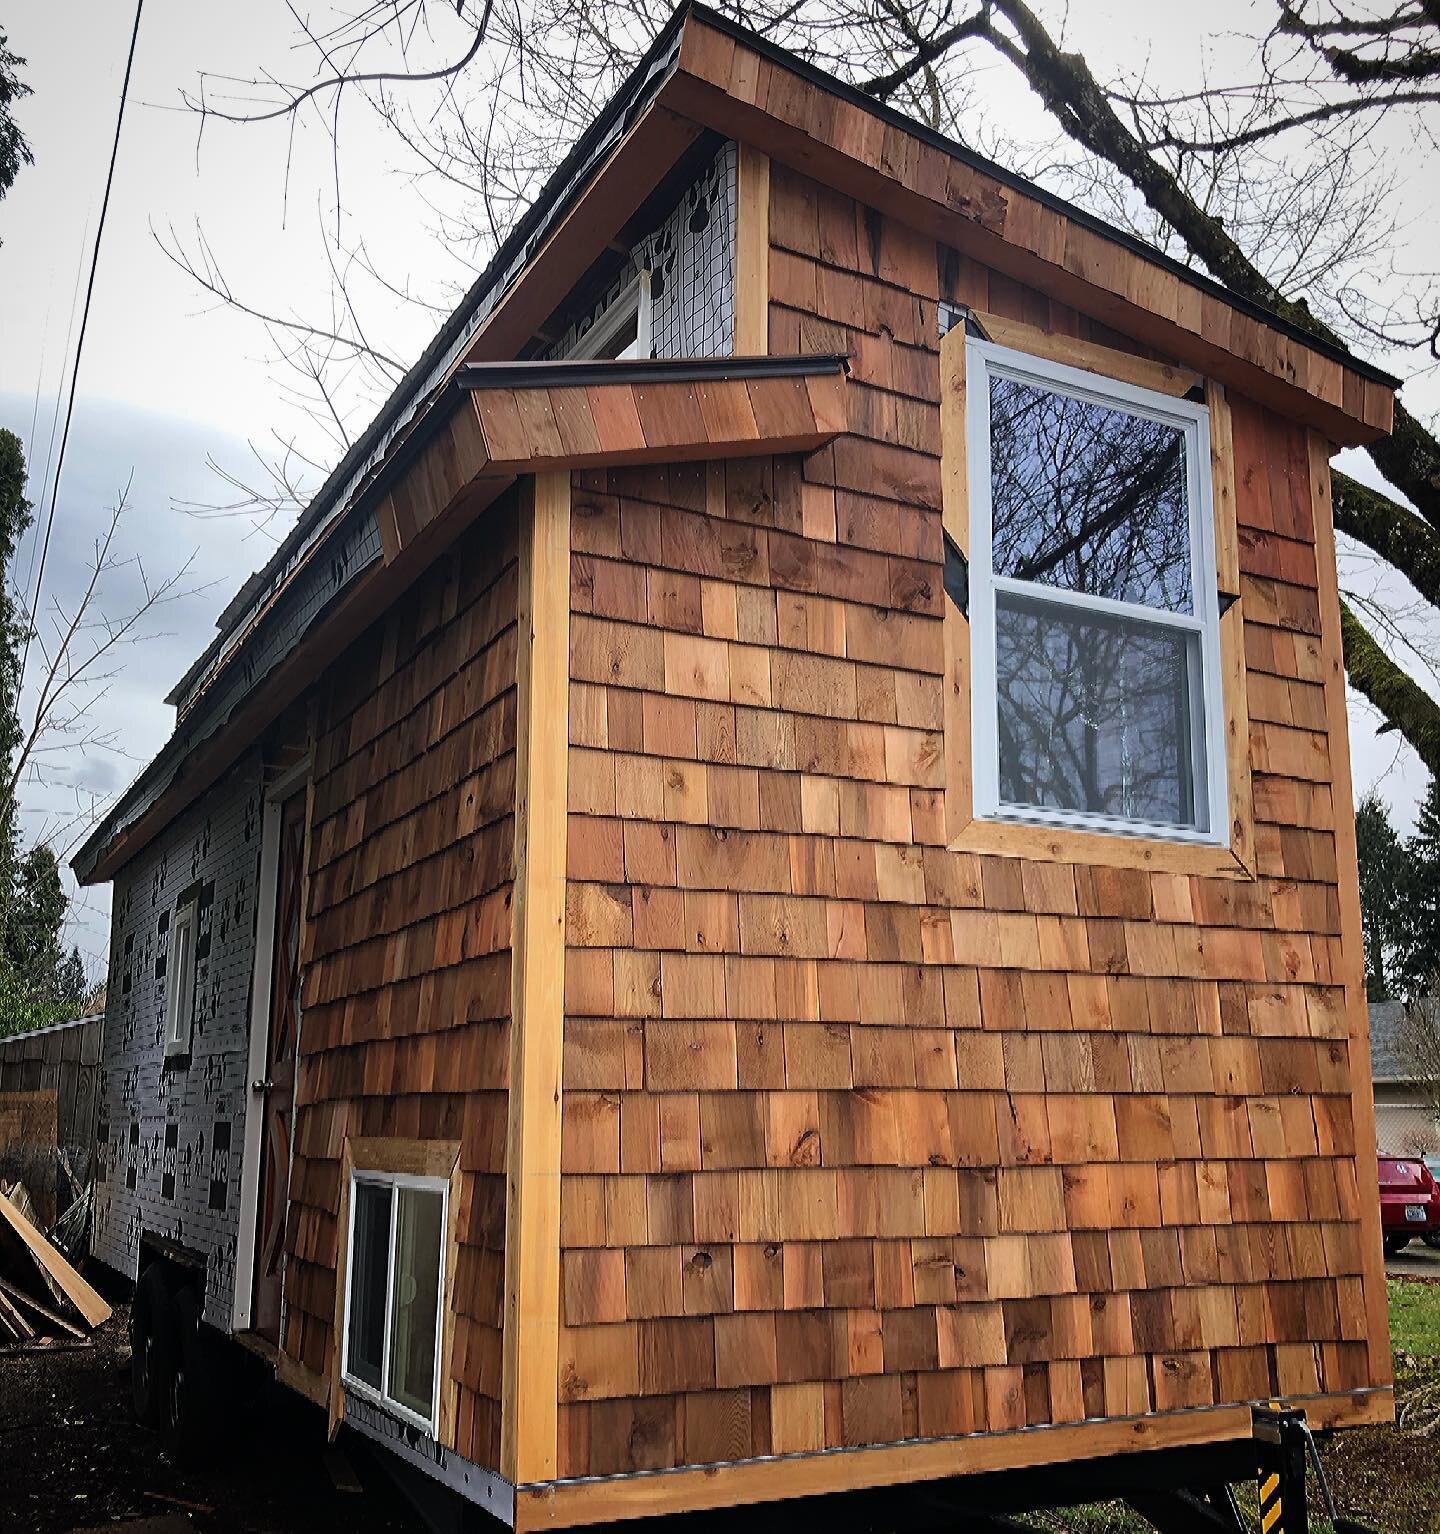 More cedar shingles went on today as the home is really beginning to take its skin. 

#tinyhouse #tinyhome #diy #cedarshakes #buildyourownhome